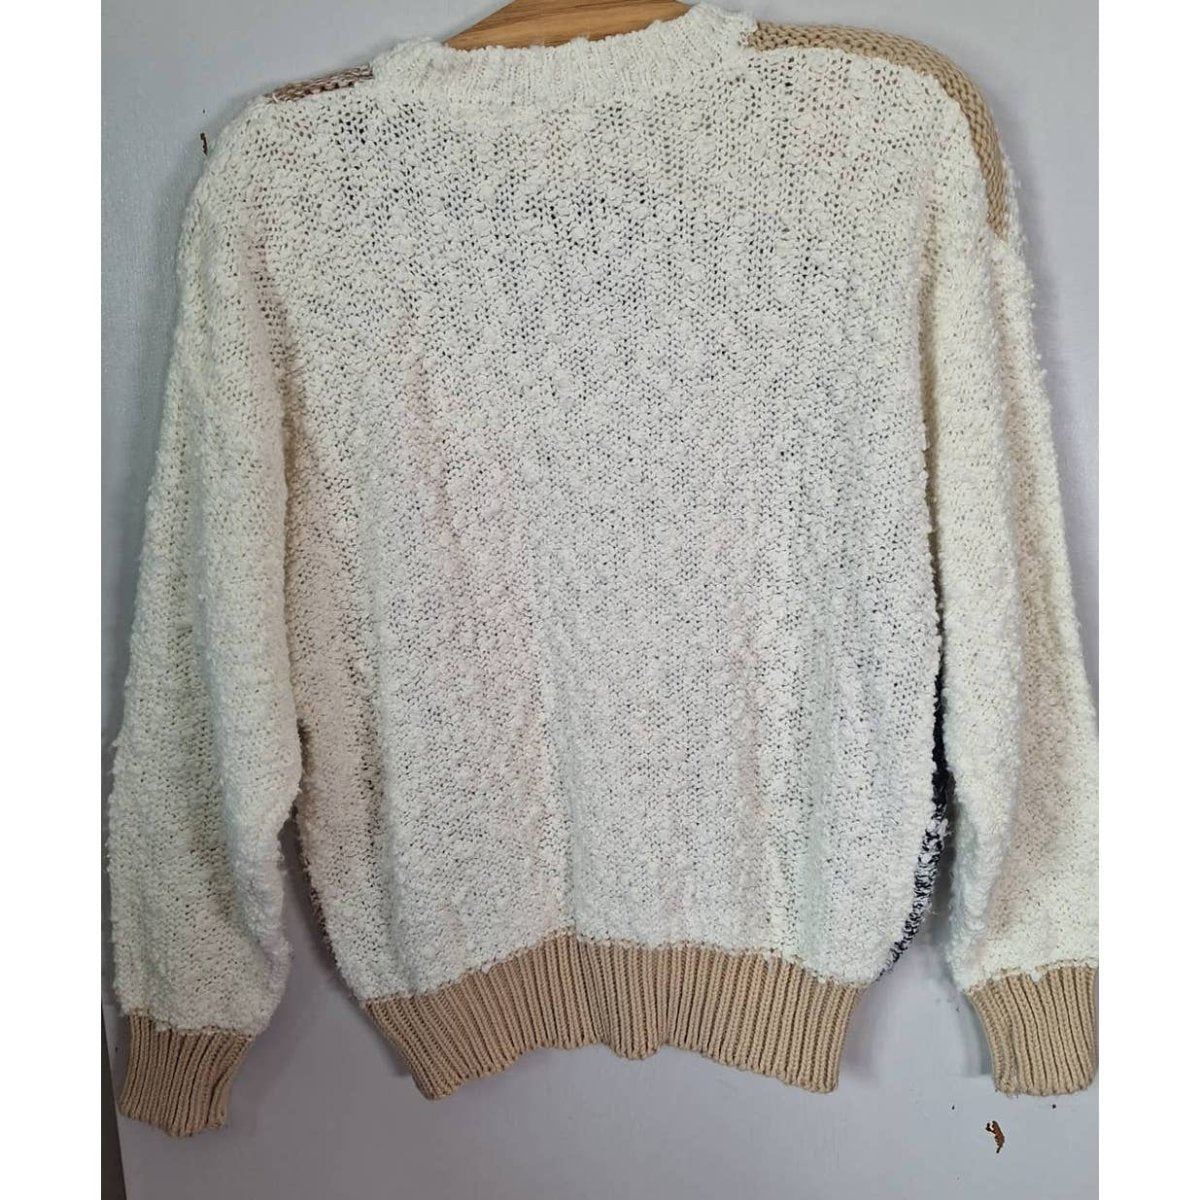 Vintage 80s Knit Patchwork Neutral Tone Sweater Size Medium - themallvintage The Mall Vintage